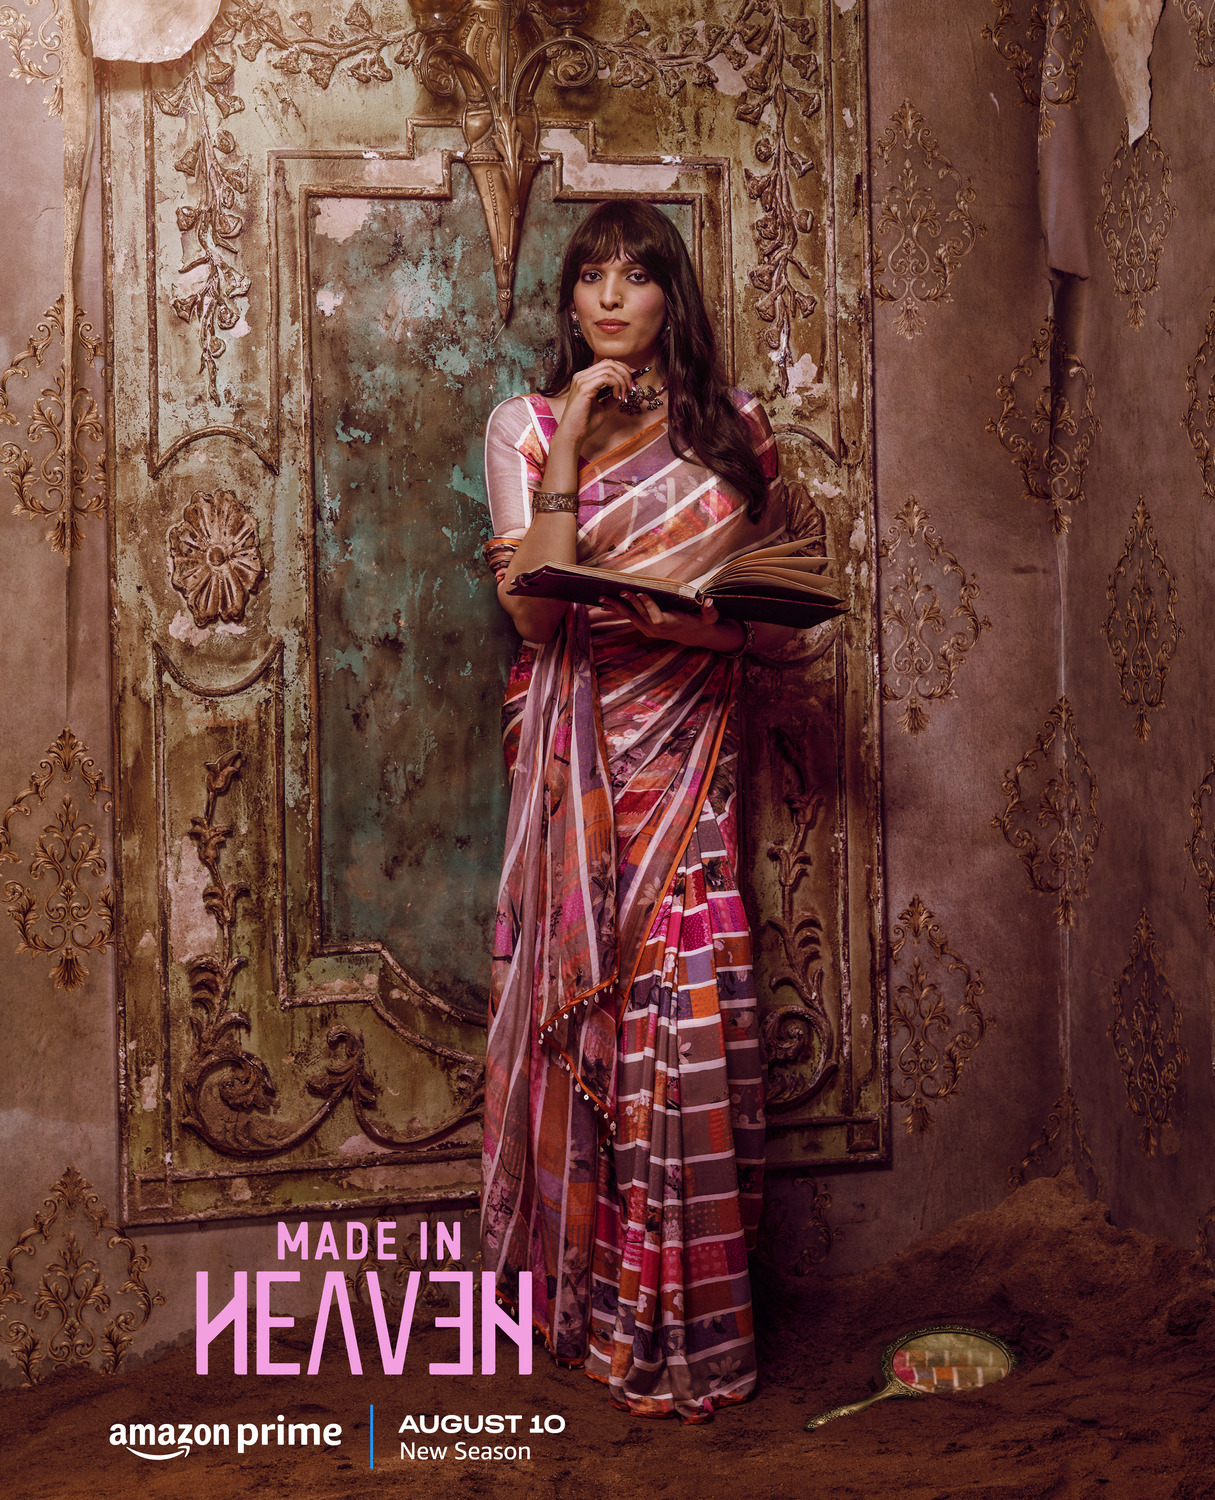 Extra Large TV Poster Image for Made in Heaven (#8 of 14)